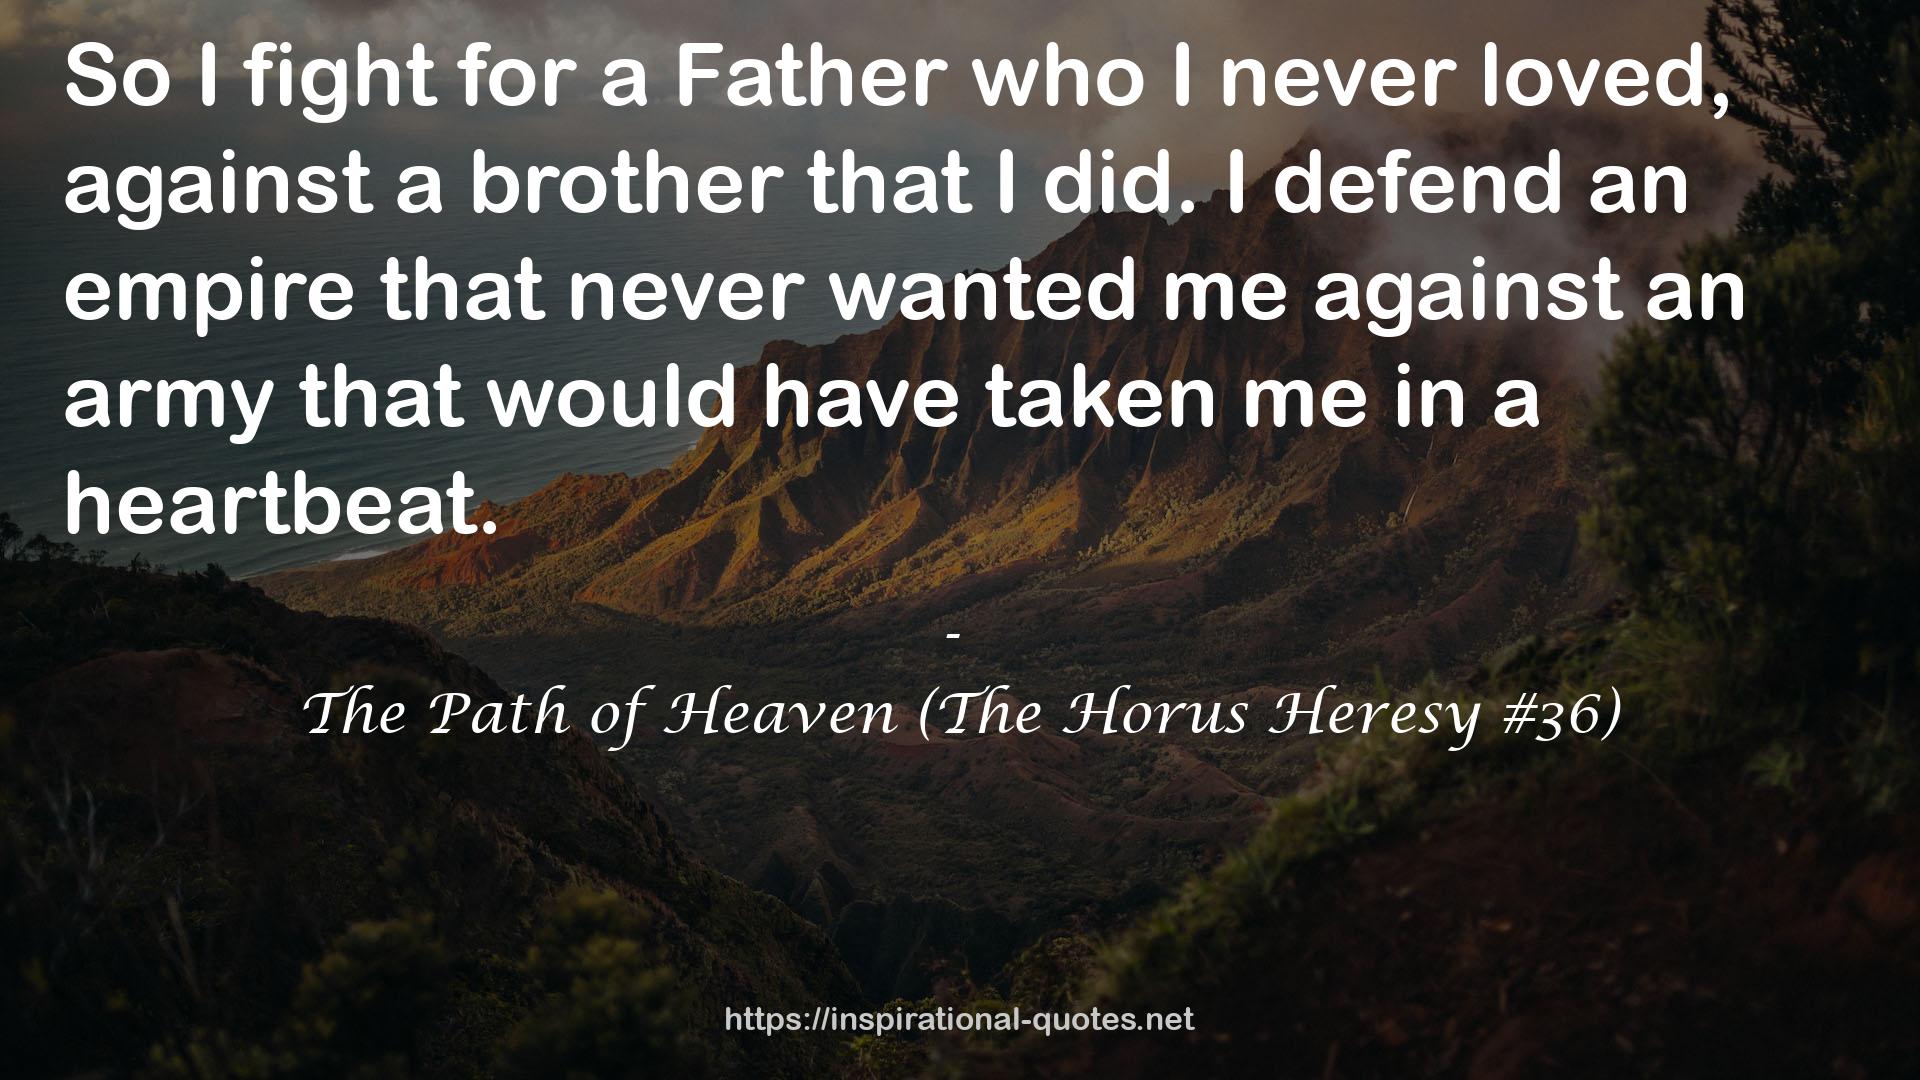 The Path of Heaven (The Horus Heresy #36) QUOTES